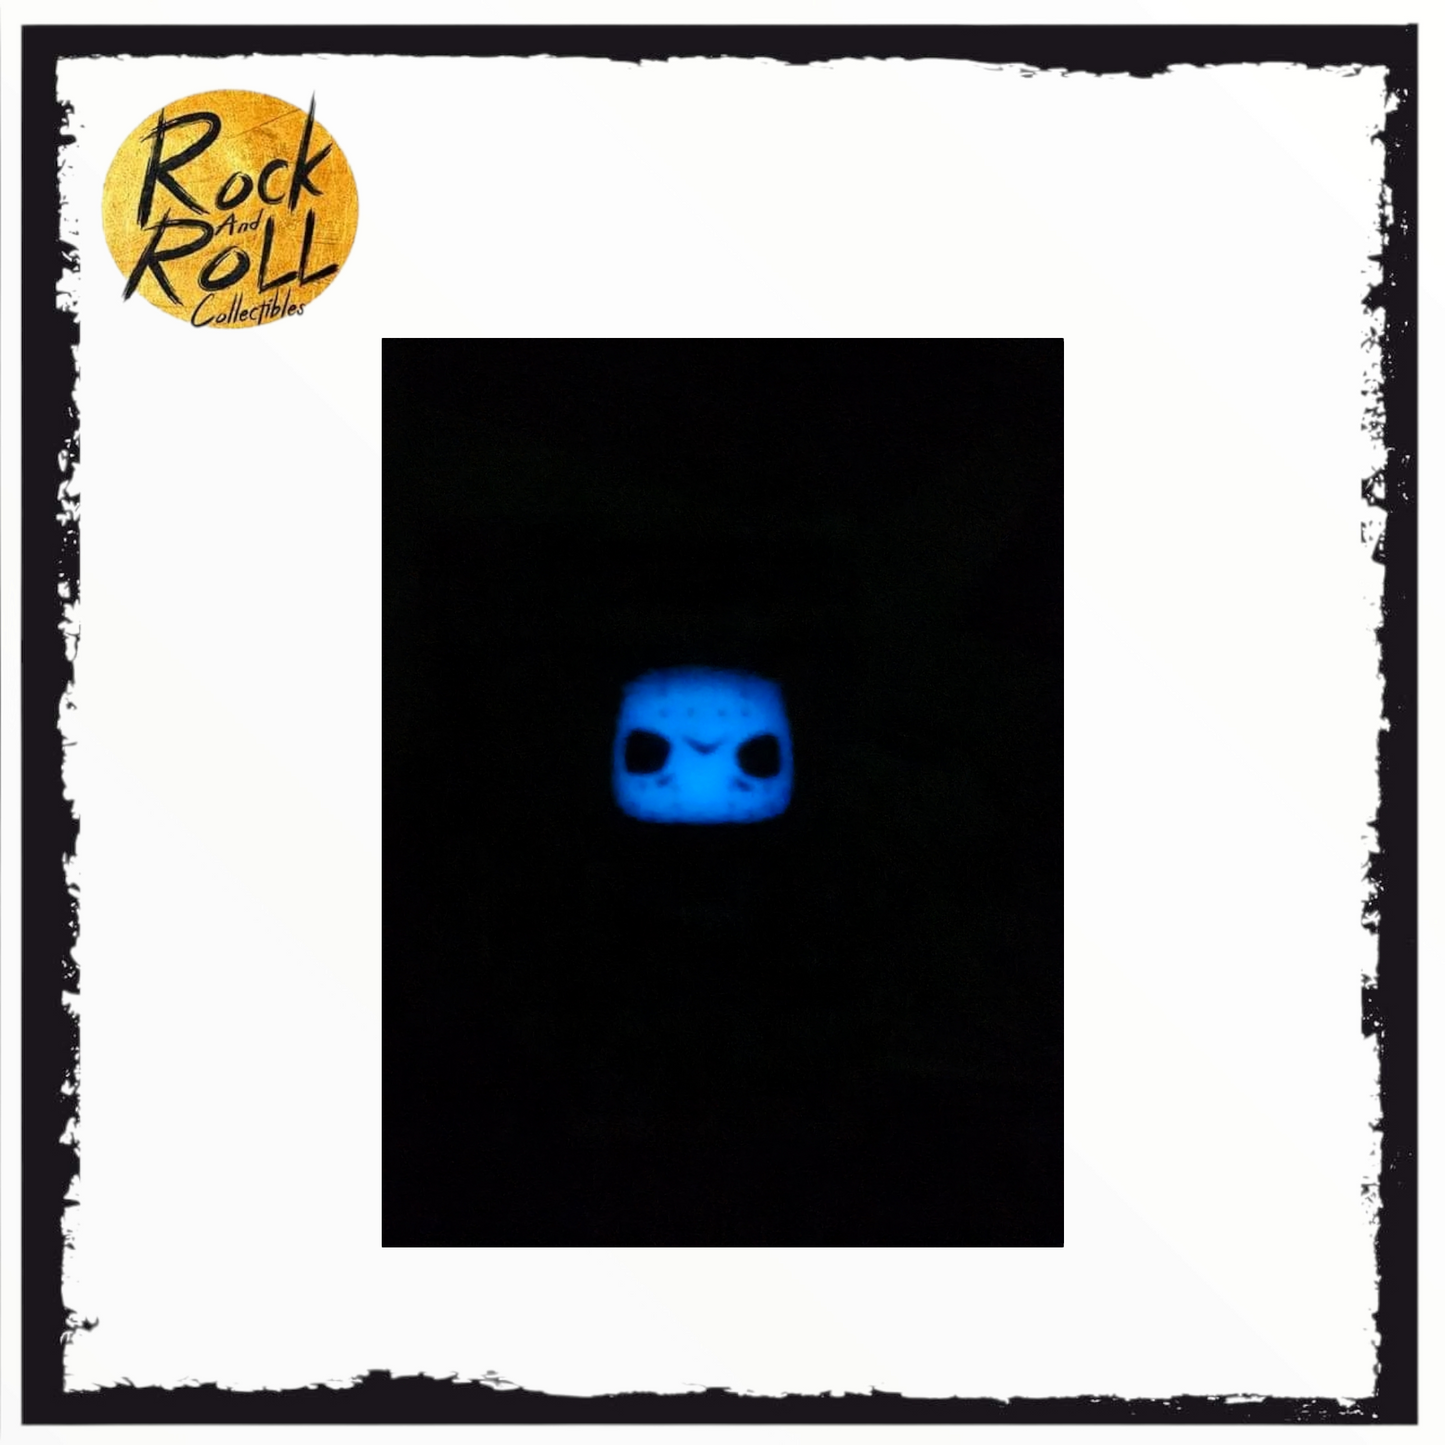 Friday the 13th - Jason Vorhees (Blue Glow Chase) Funko Pop! #01